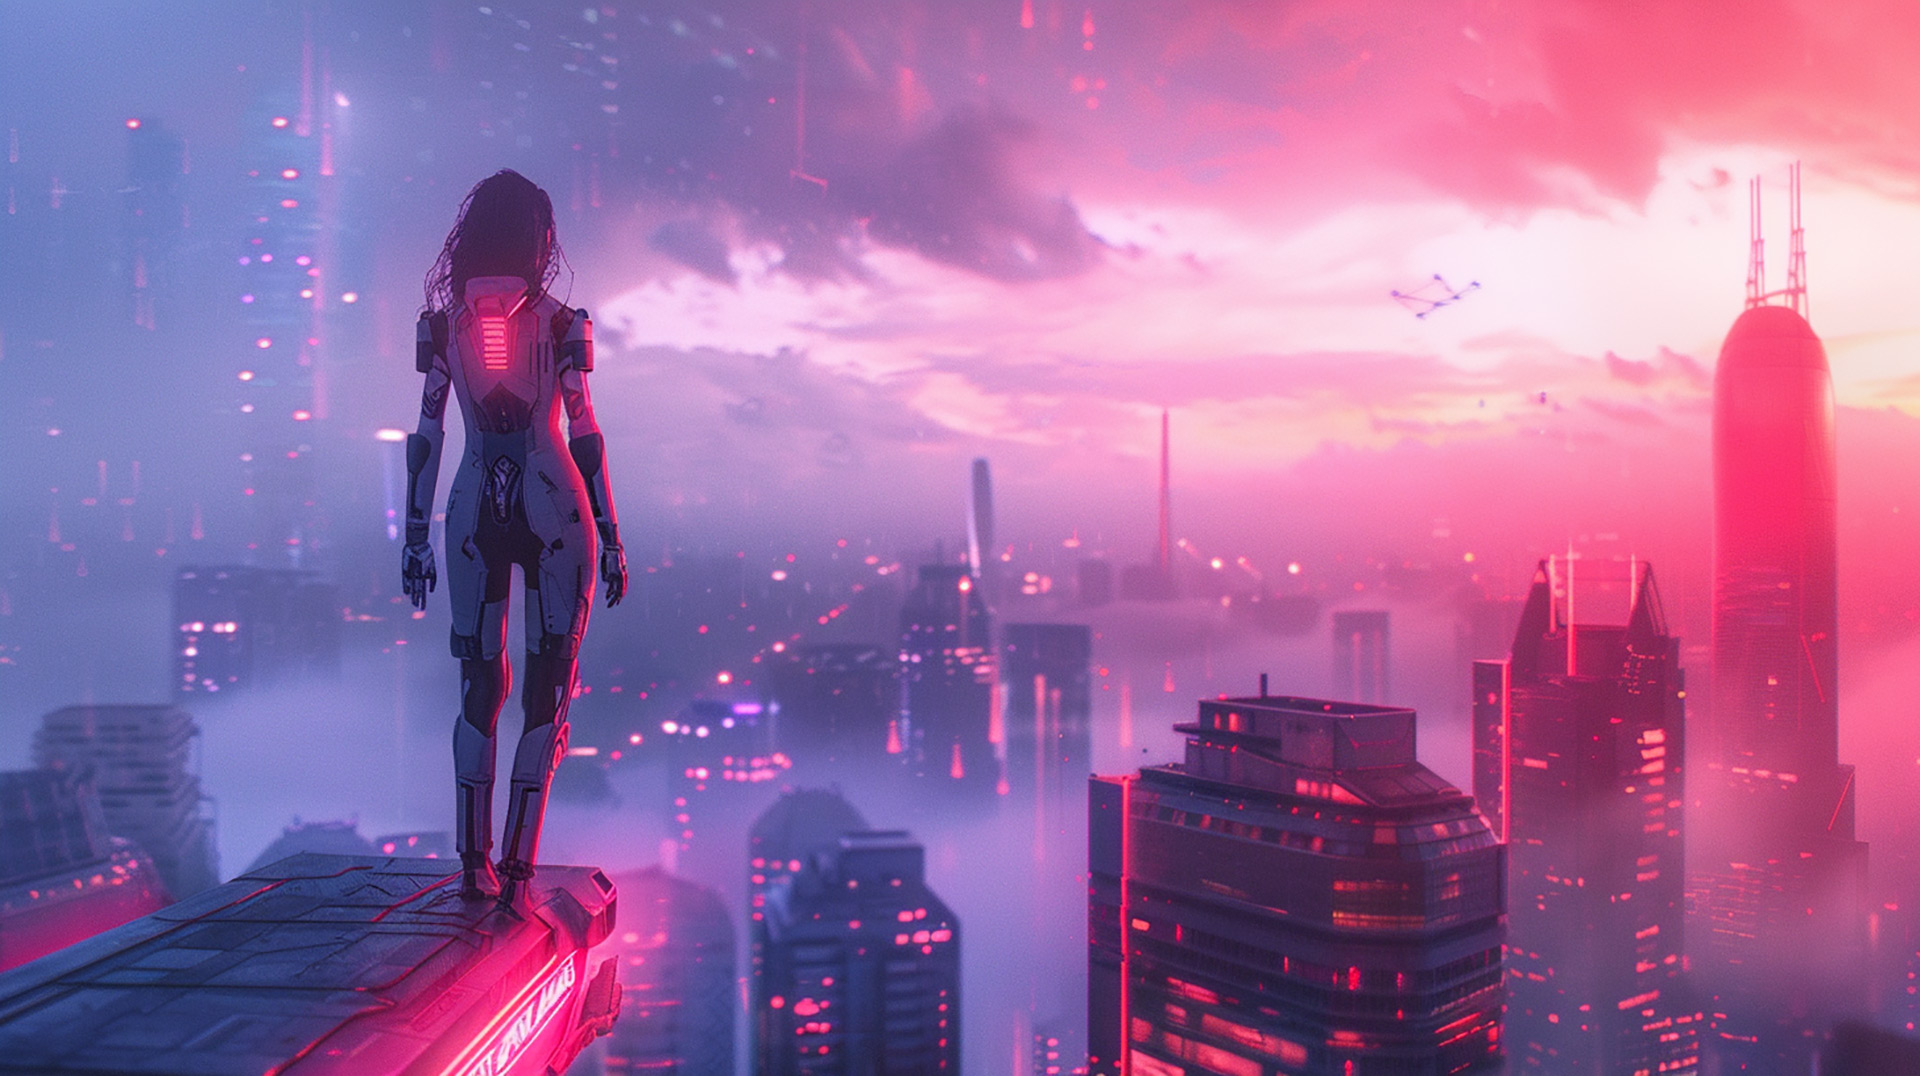 Android Aesthetics: Futuristic Girl in Robotic Themes